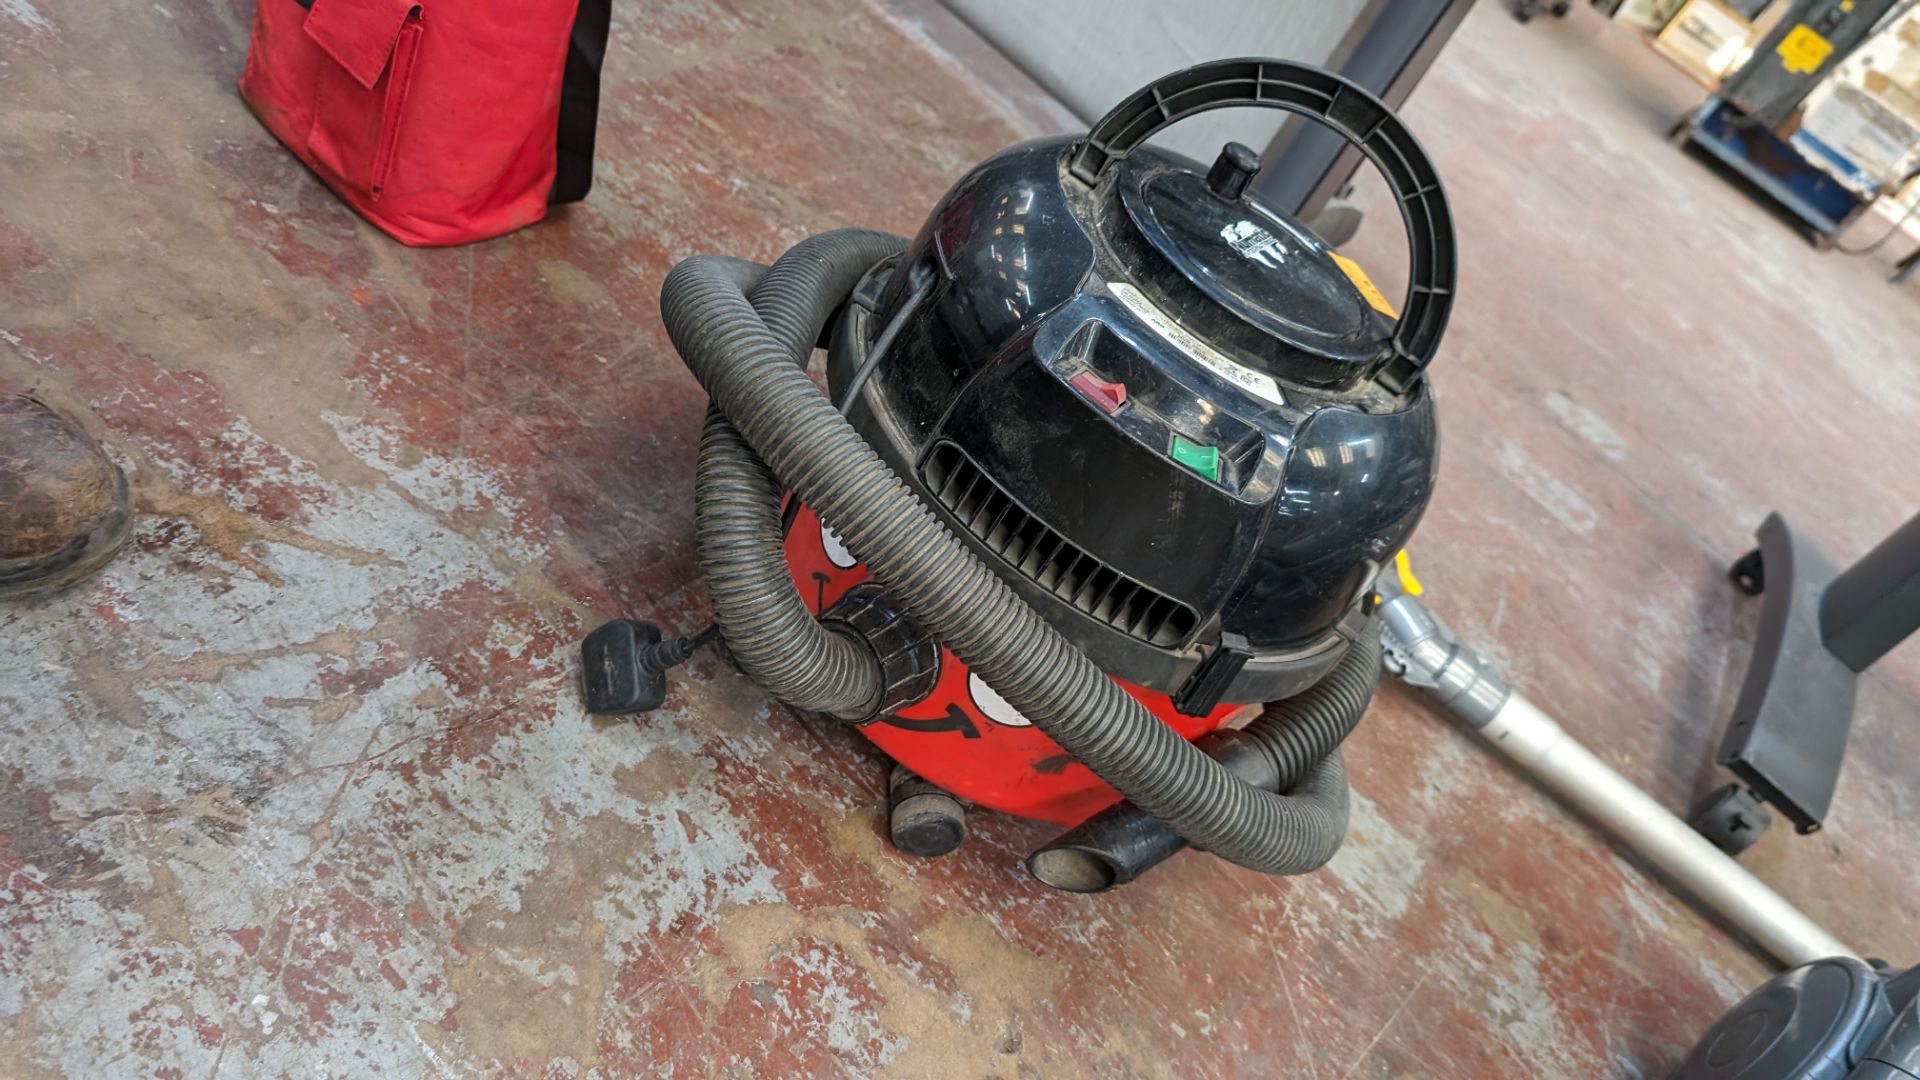 Henry vacuum cleaner - Image 5 of 5